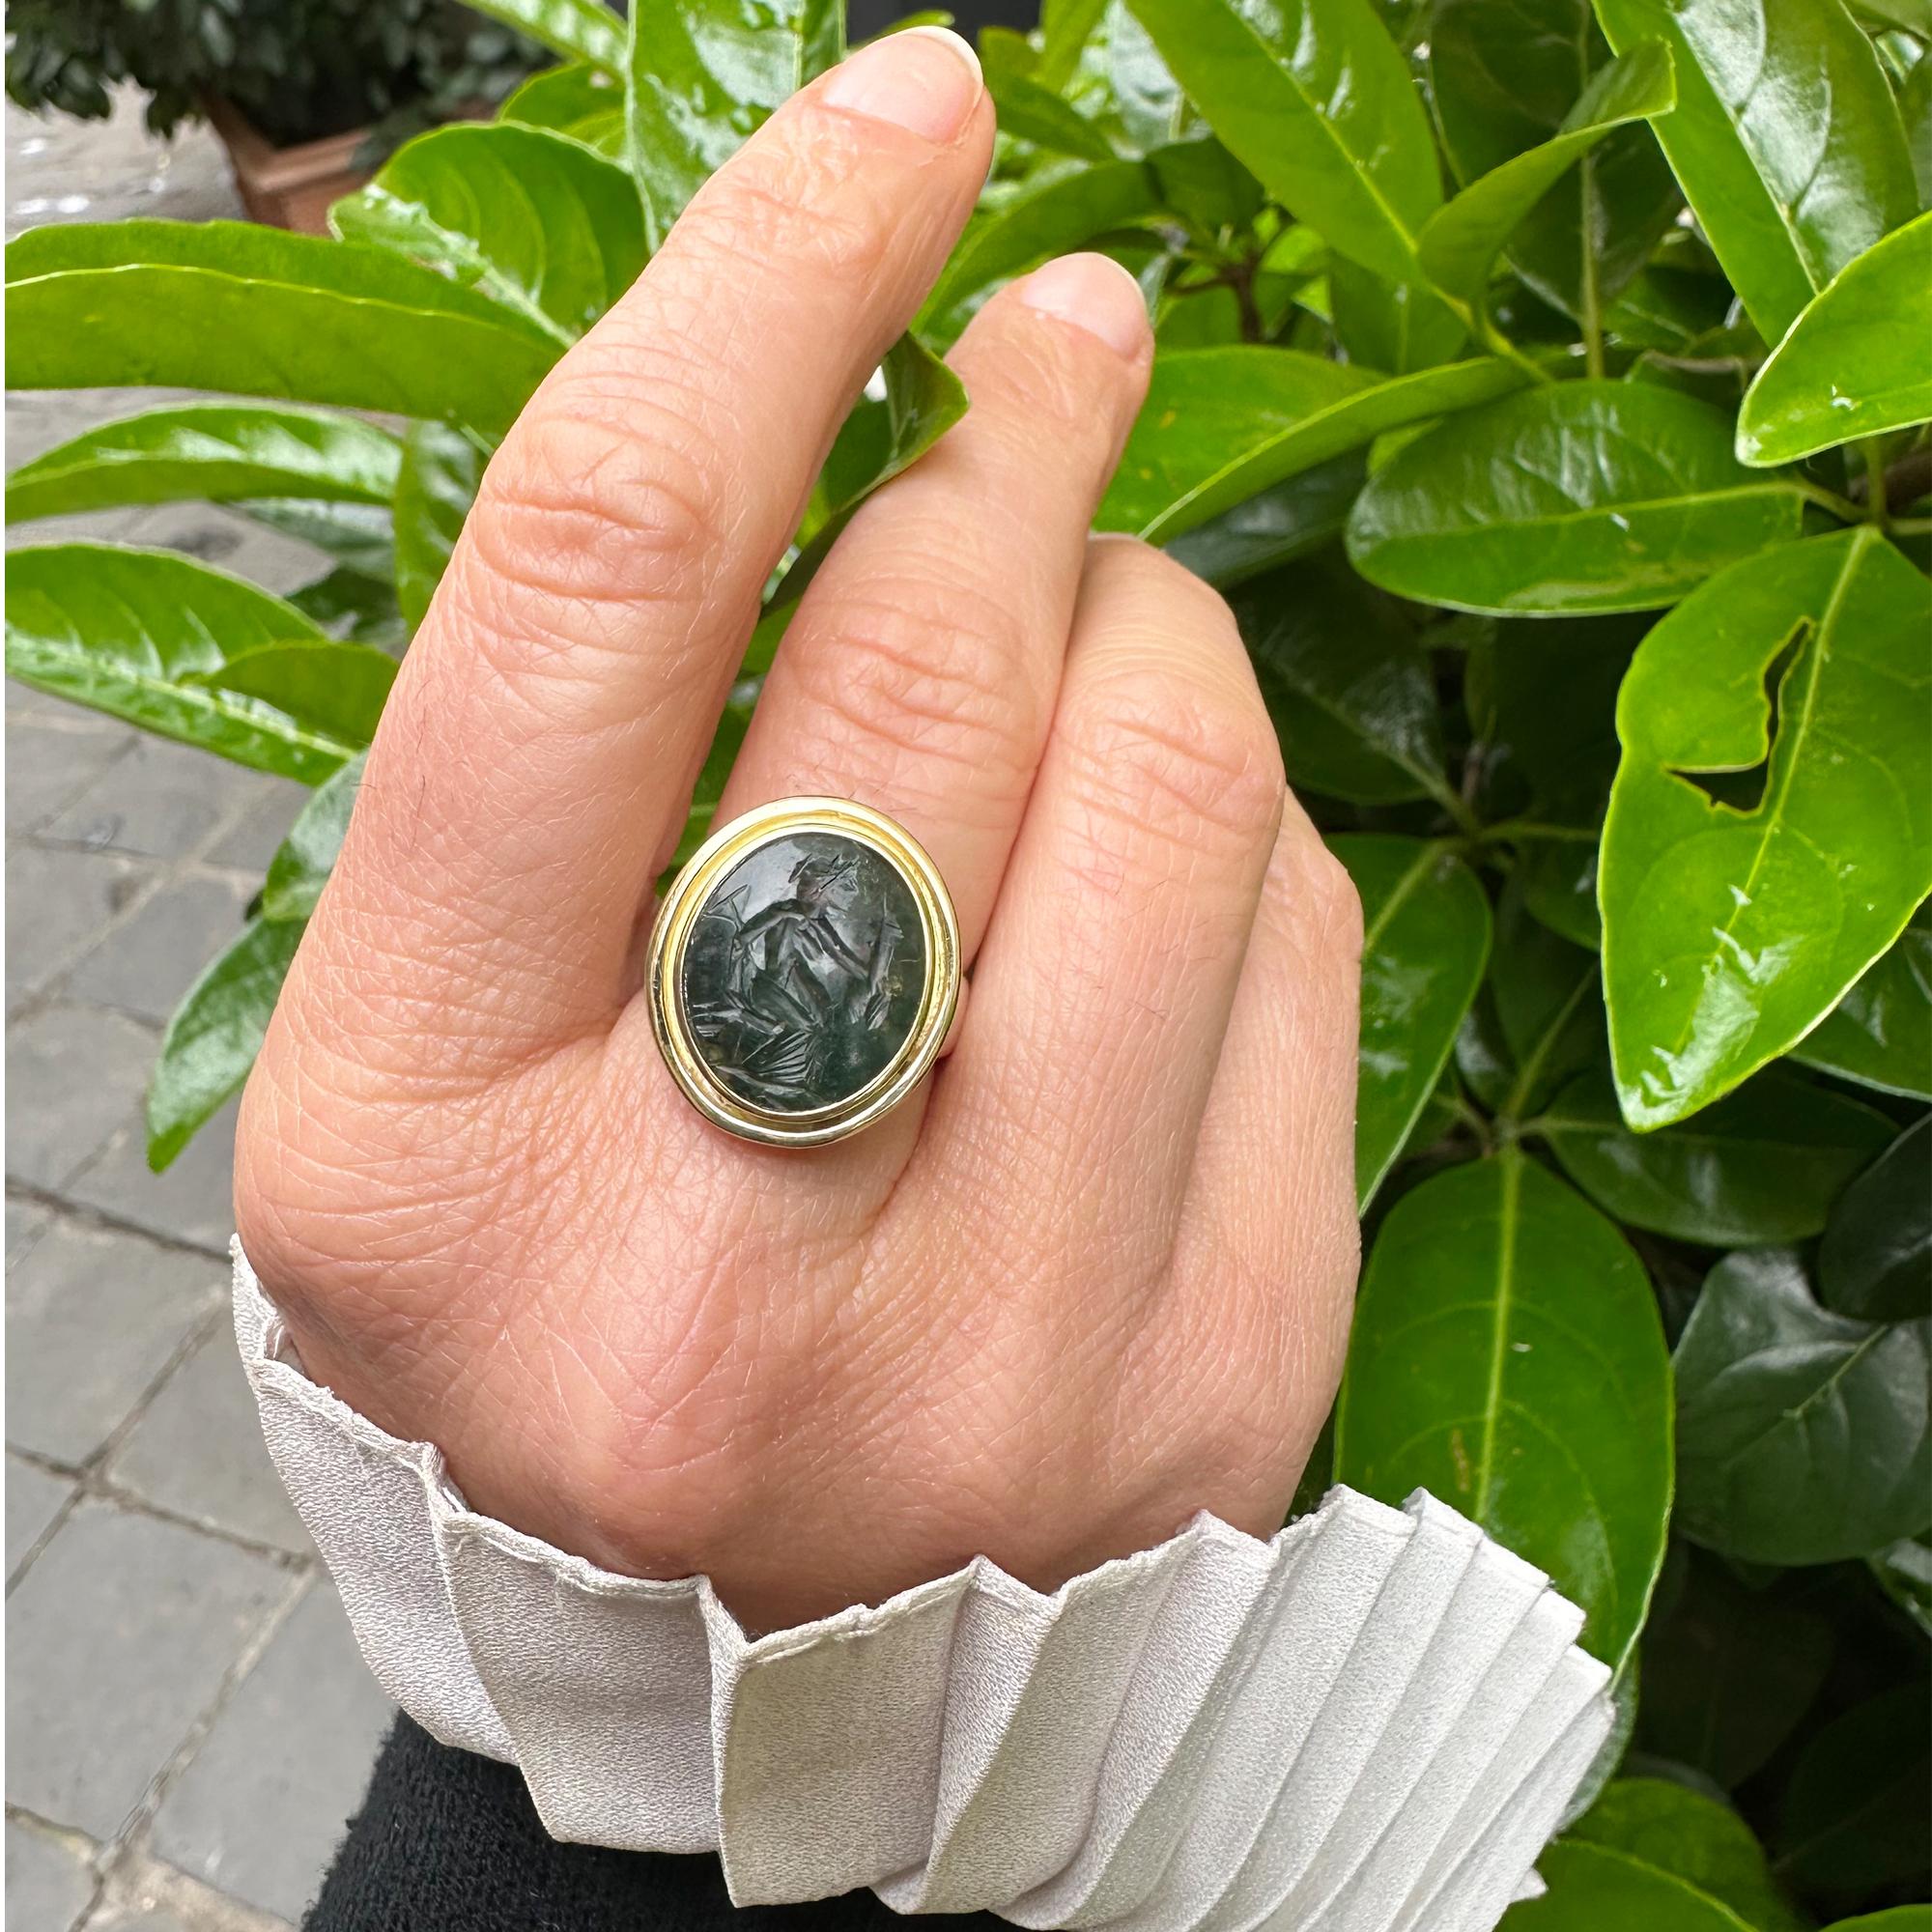 This ring, handmade in 18 kt gold and silver by our goldsmiths based on an original Serra design, has been set with an authentic Roman intaglio on prasio dating back to the 1st-2nd century. AD, which depicts the goddess Fortuna with a rudder behind